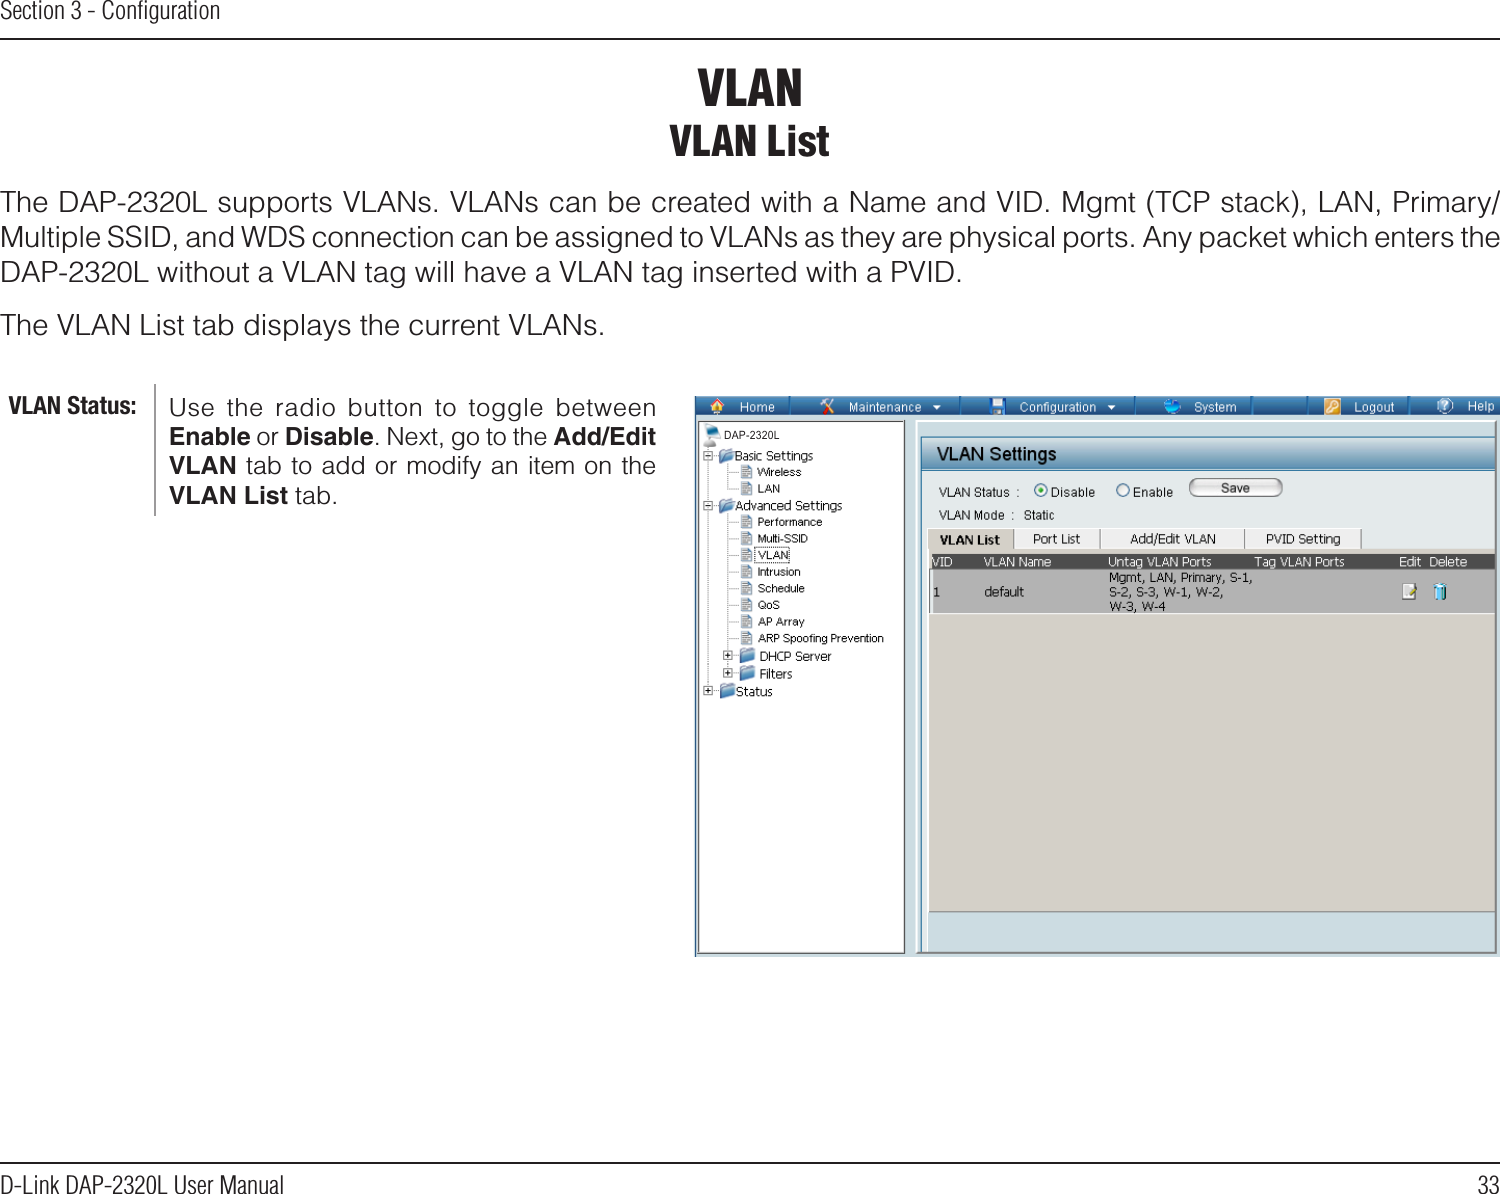 33D-Link DAP-2320L User ManualSection 3 - ConﬁgurationVLANVLAN ListThe DAP-2320L supports VLANs. VLANs can be created with a Name and VID. Mgmt (TCP stack), LAN, Primary/Multiple SSID, and WDS connection can be assigned to VLANs as they are physical ports. Any packet which enters the DAP-2320L without a VLAN tag will have a VLAN tag inserted with a PVID.The VLAN List tab displays the current VLANs.Use  the  radio  button  to  toggle  between Enable or Disable. Next, go to the Add/Edit VLAN tab to add or modify an item on the VLAN List tab. VLAN Status:DAP-2320L